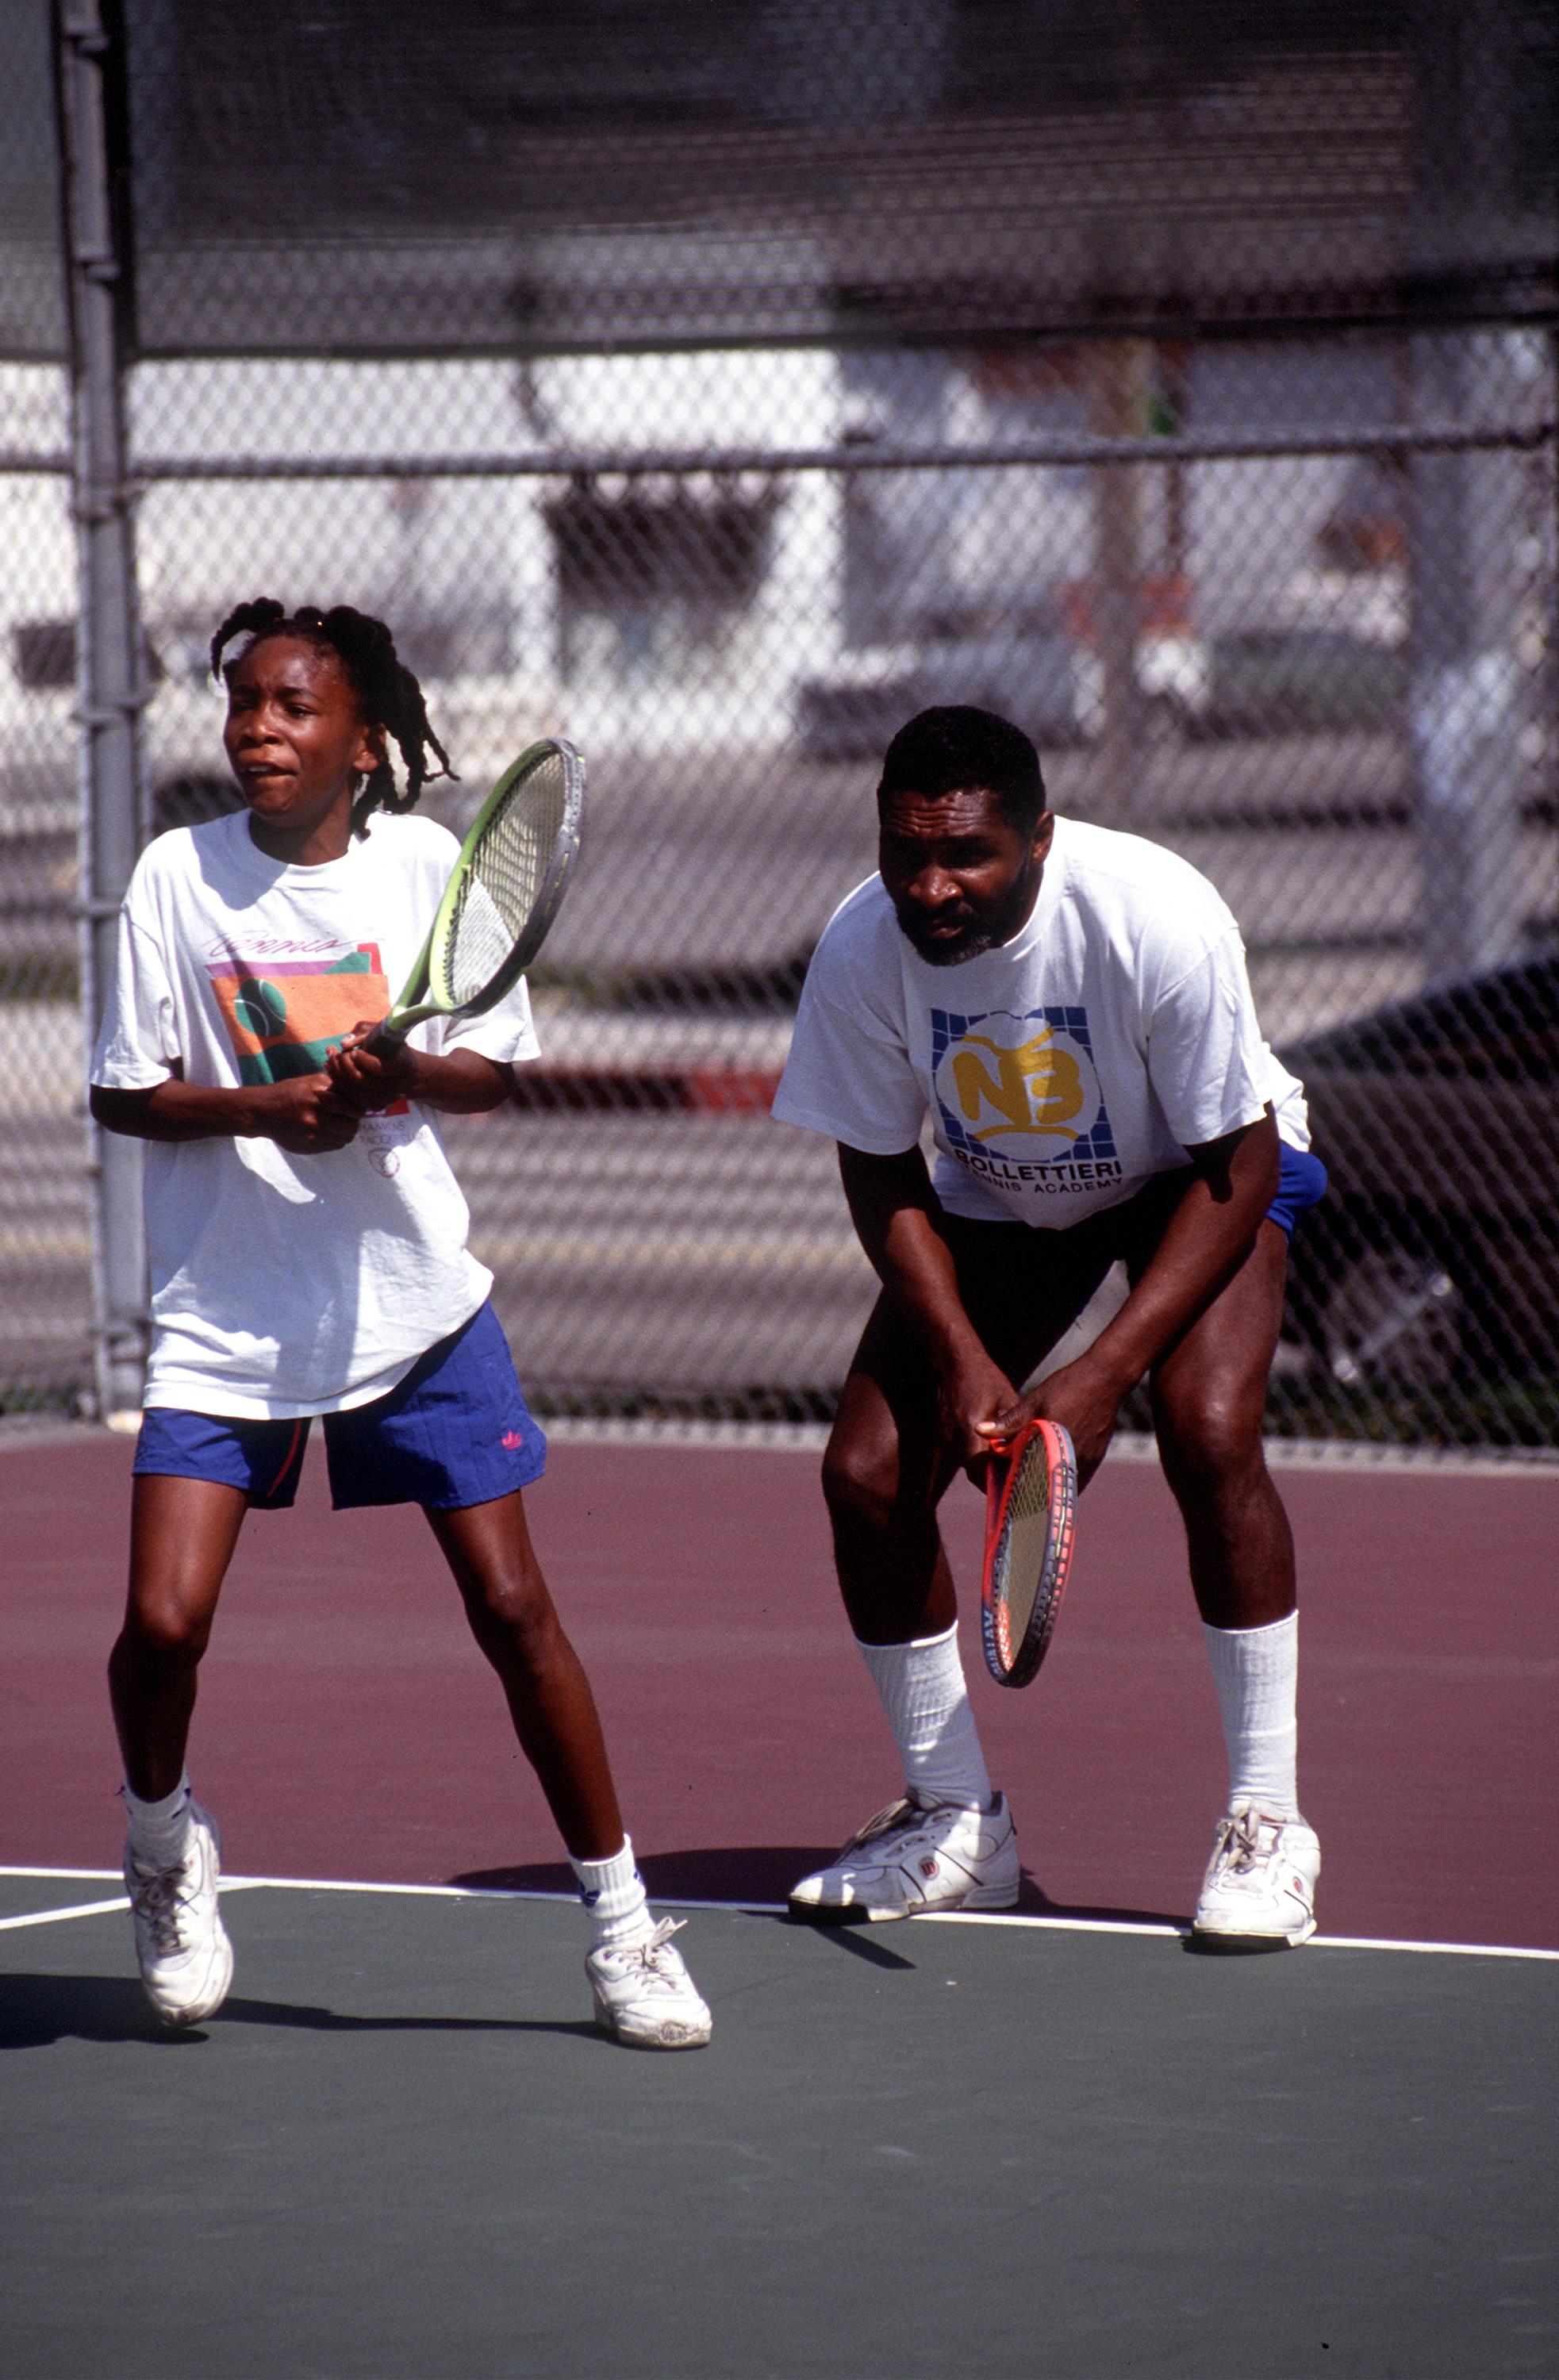  Richard WIlliams is pictured with his daughter, Venus, during a training session at the Compton tennis courts on April 20, 1991, in South Central Los Angeles, California | Source: Getty Images